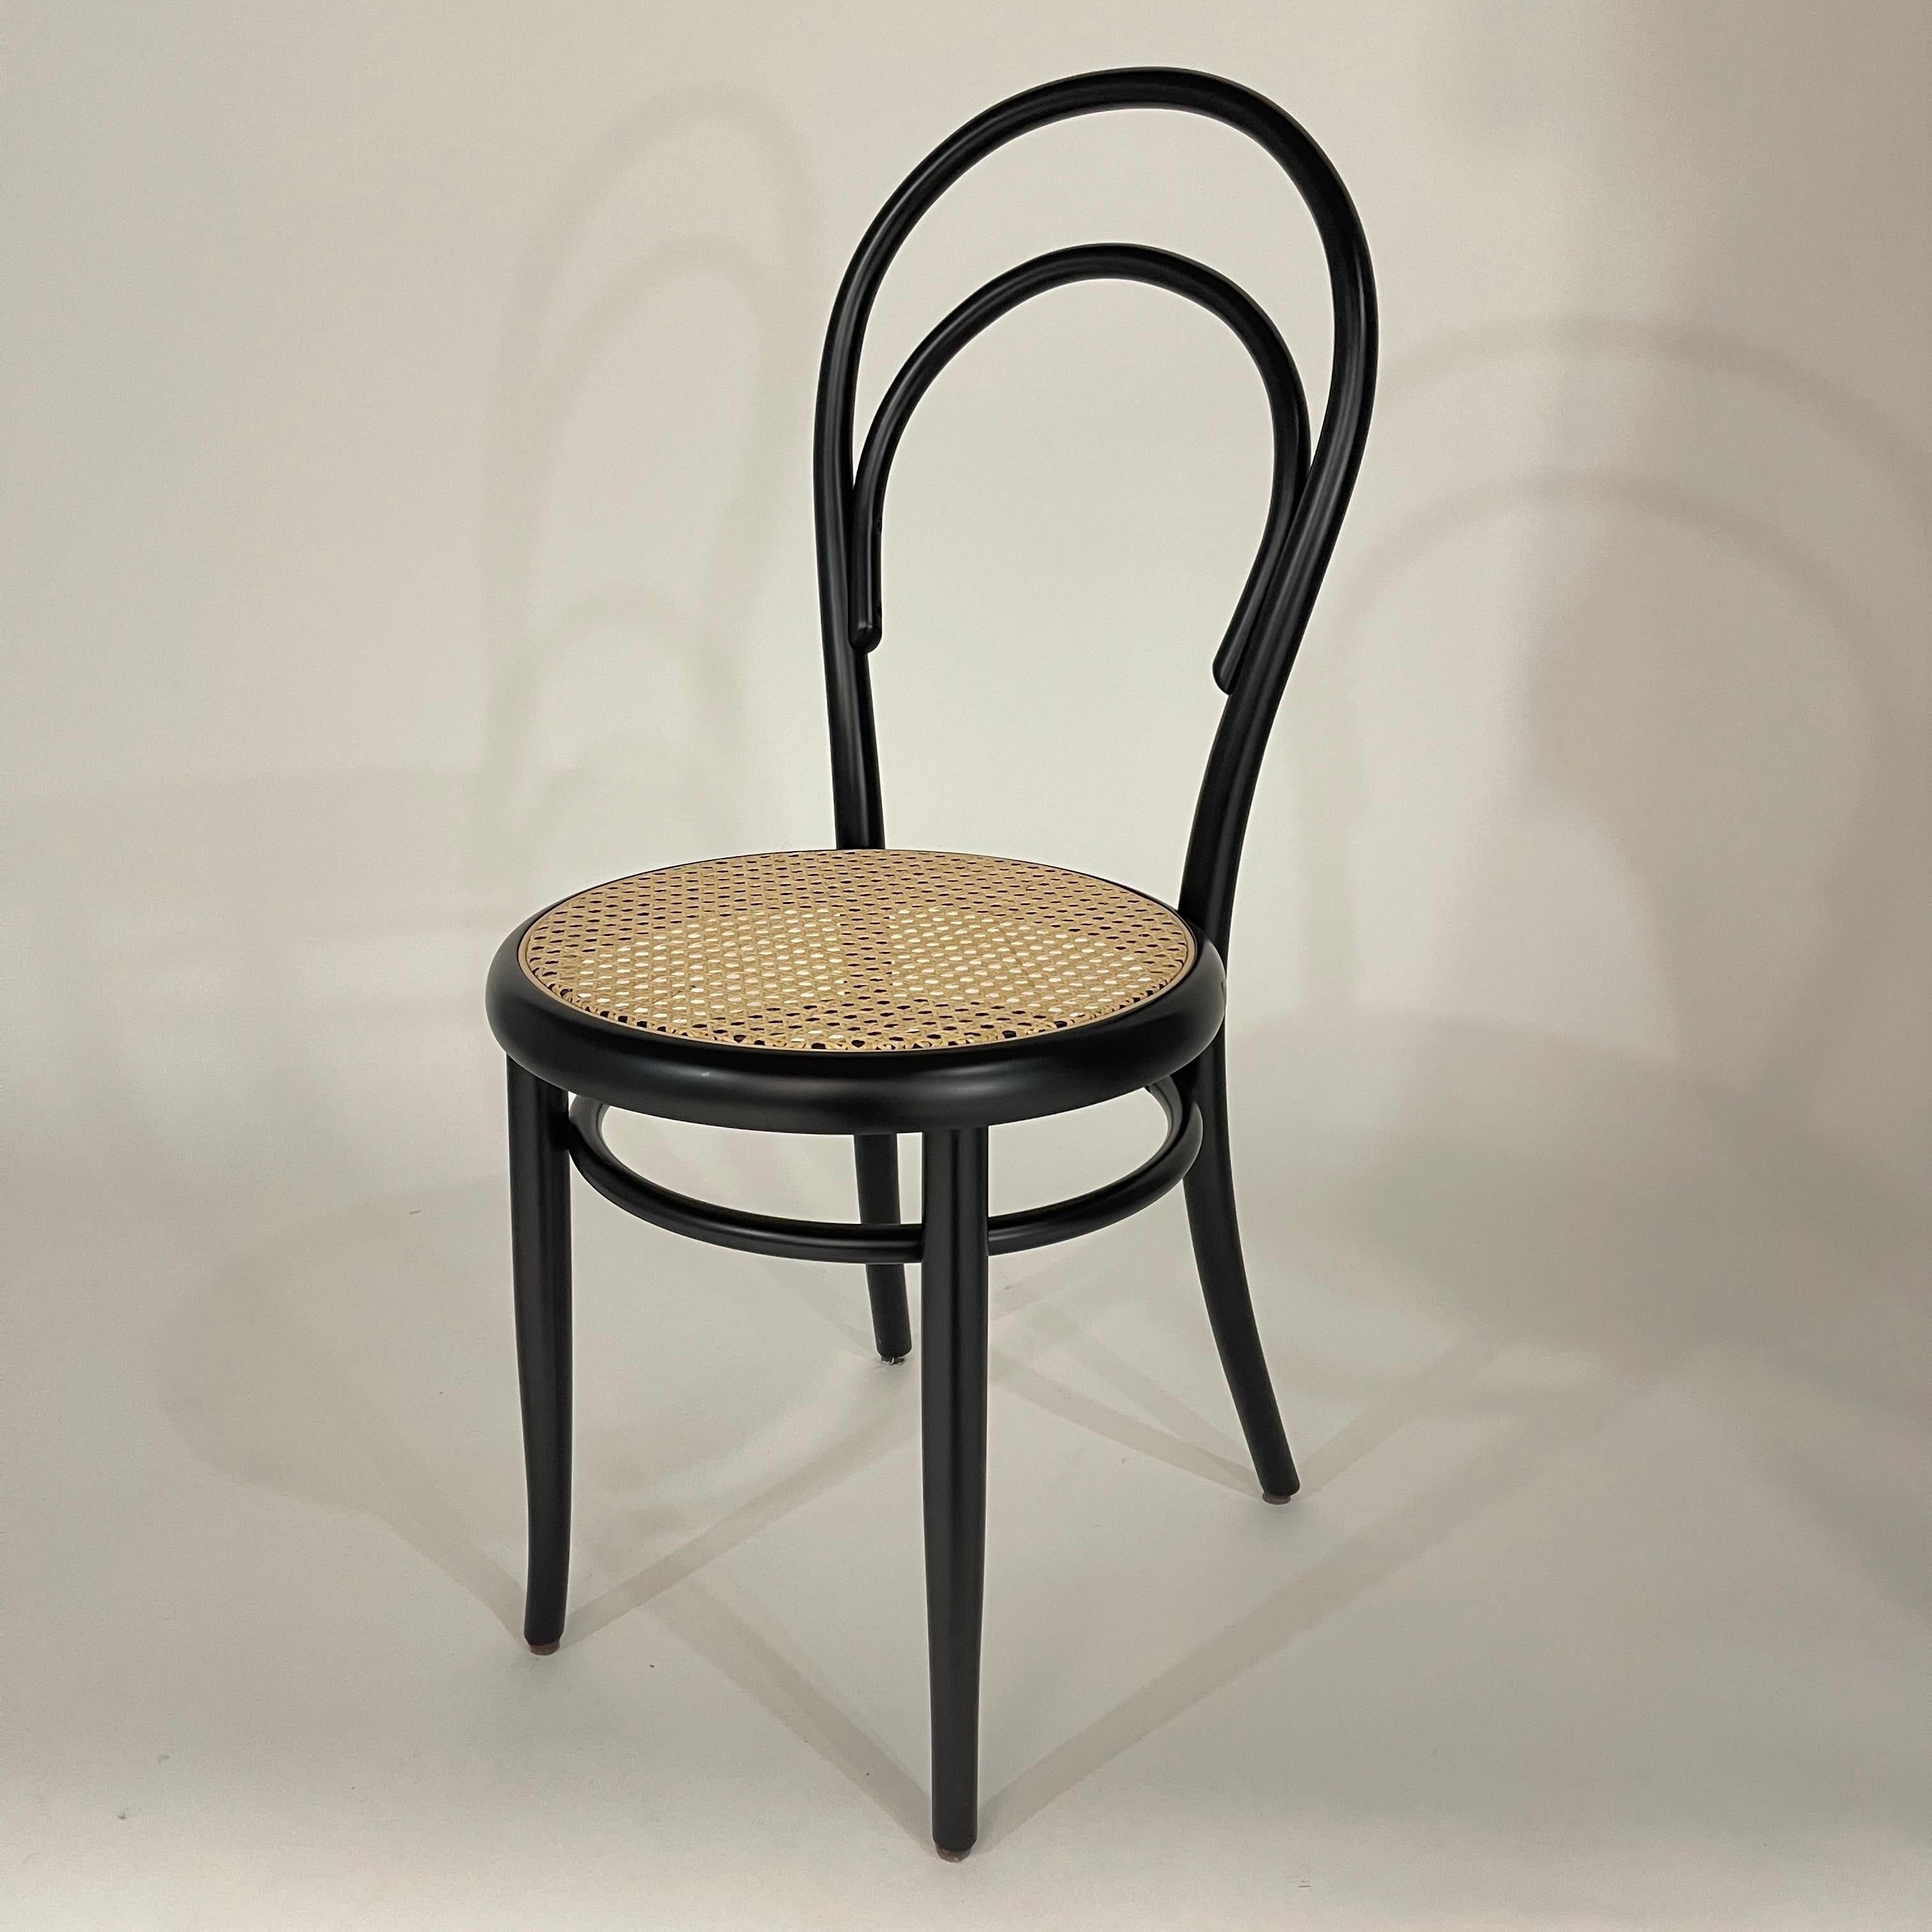 Iconic N. 14 Bistro dining chair or side chair designed by Michael Thonet, rendered in black painted beech bentwood frame with a woven wicker cain seat.  Austria